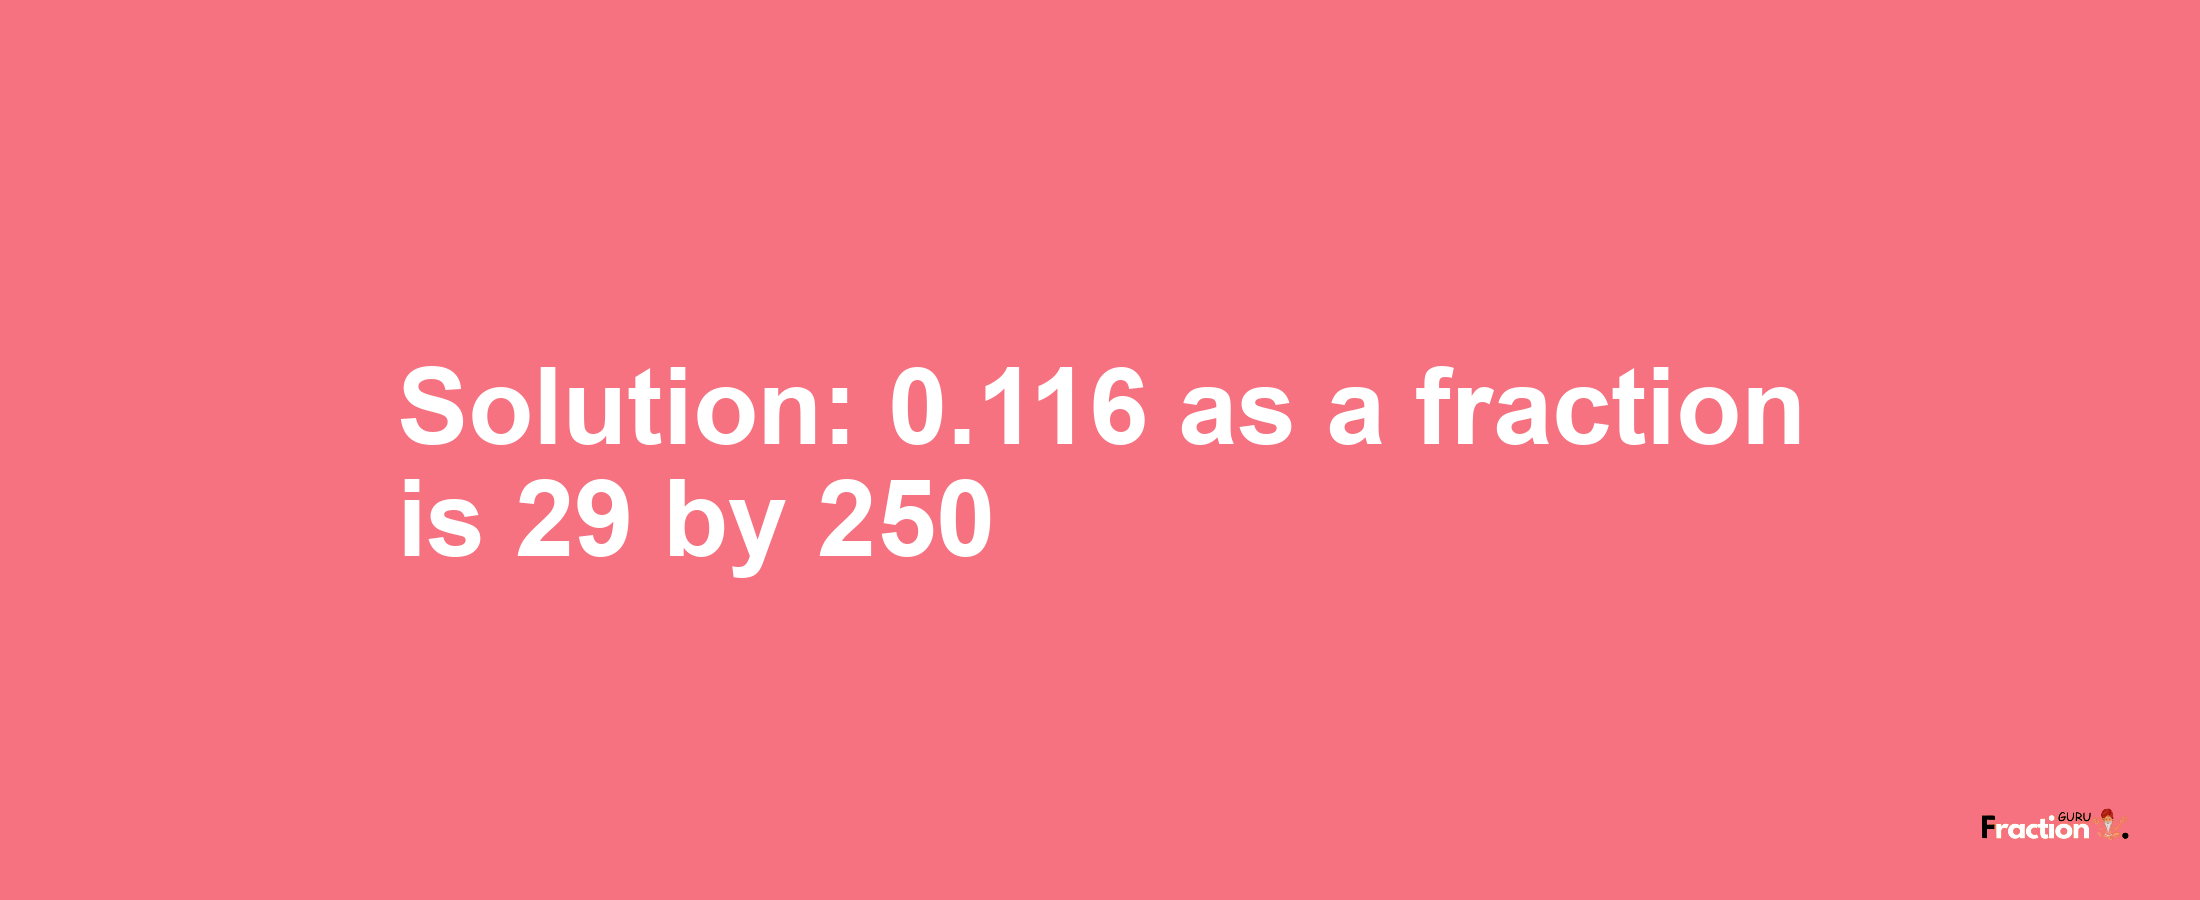 Solution:0.116 as a fraction is 29/250